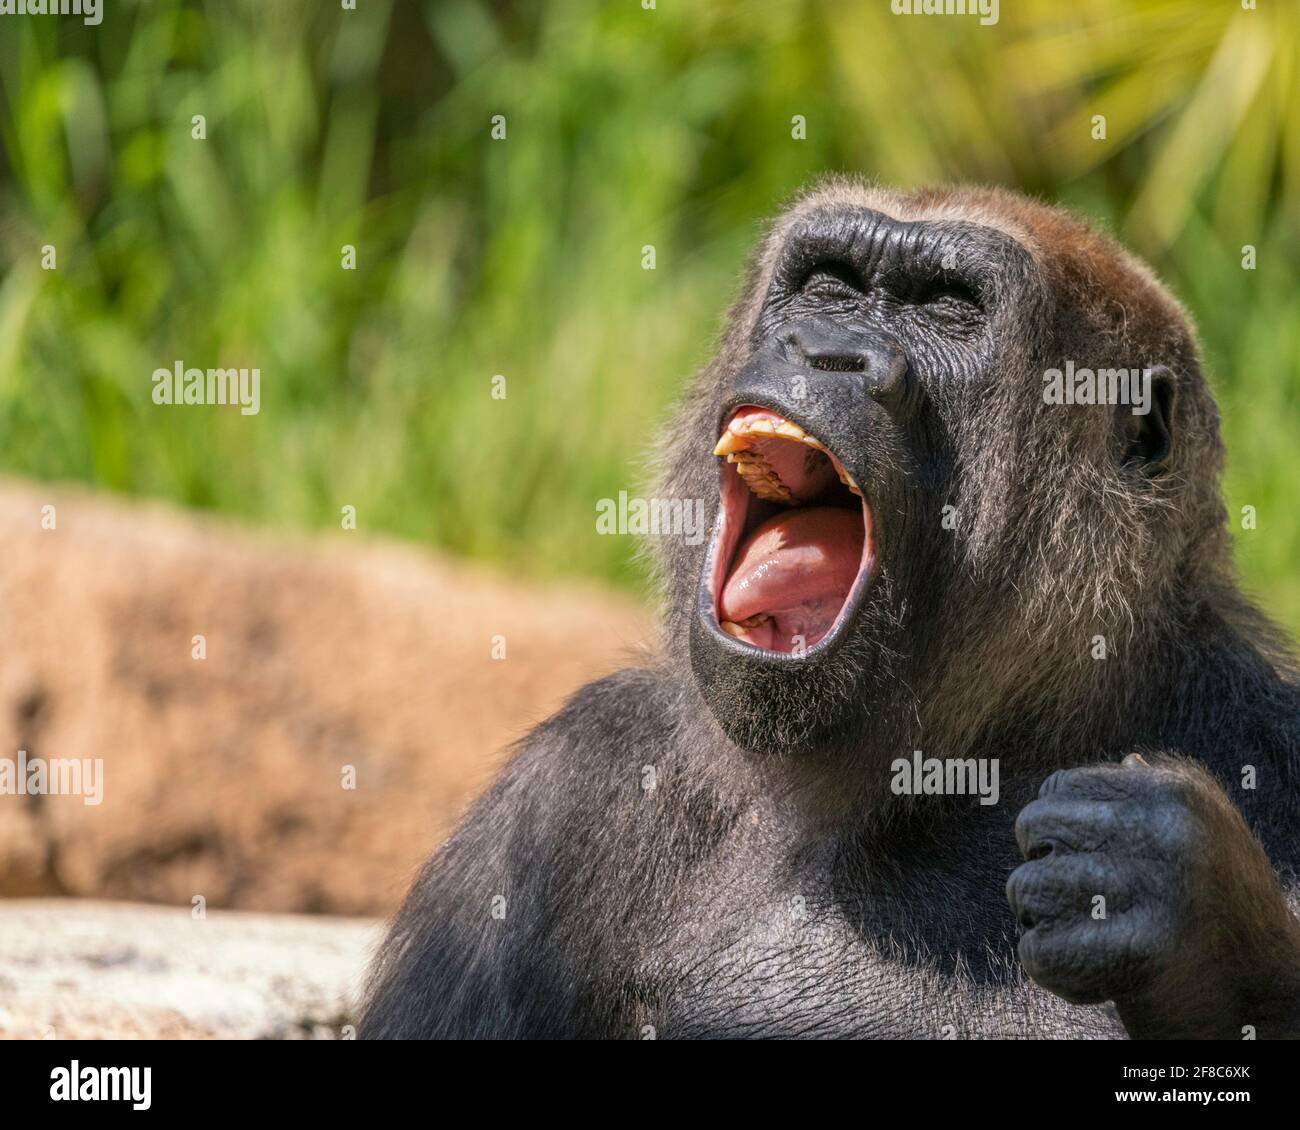 Los Angeles, CA, USA: March 31, 2021: A portrait of a Western Lowland Gorilla at the LA Zoo in Los Angeles, CA. Stock Photo